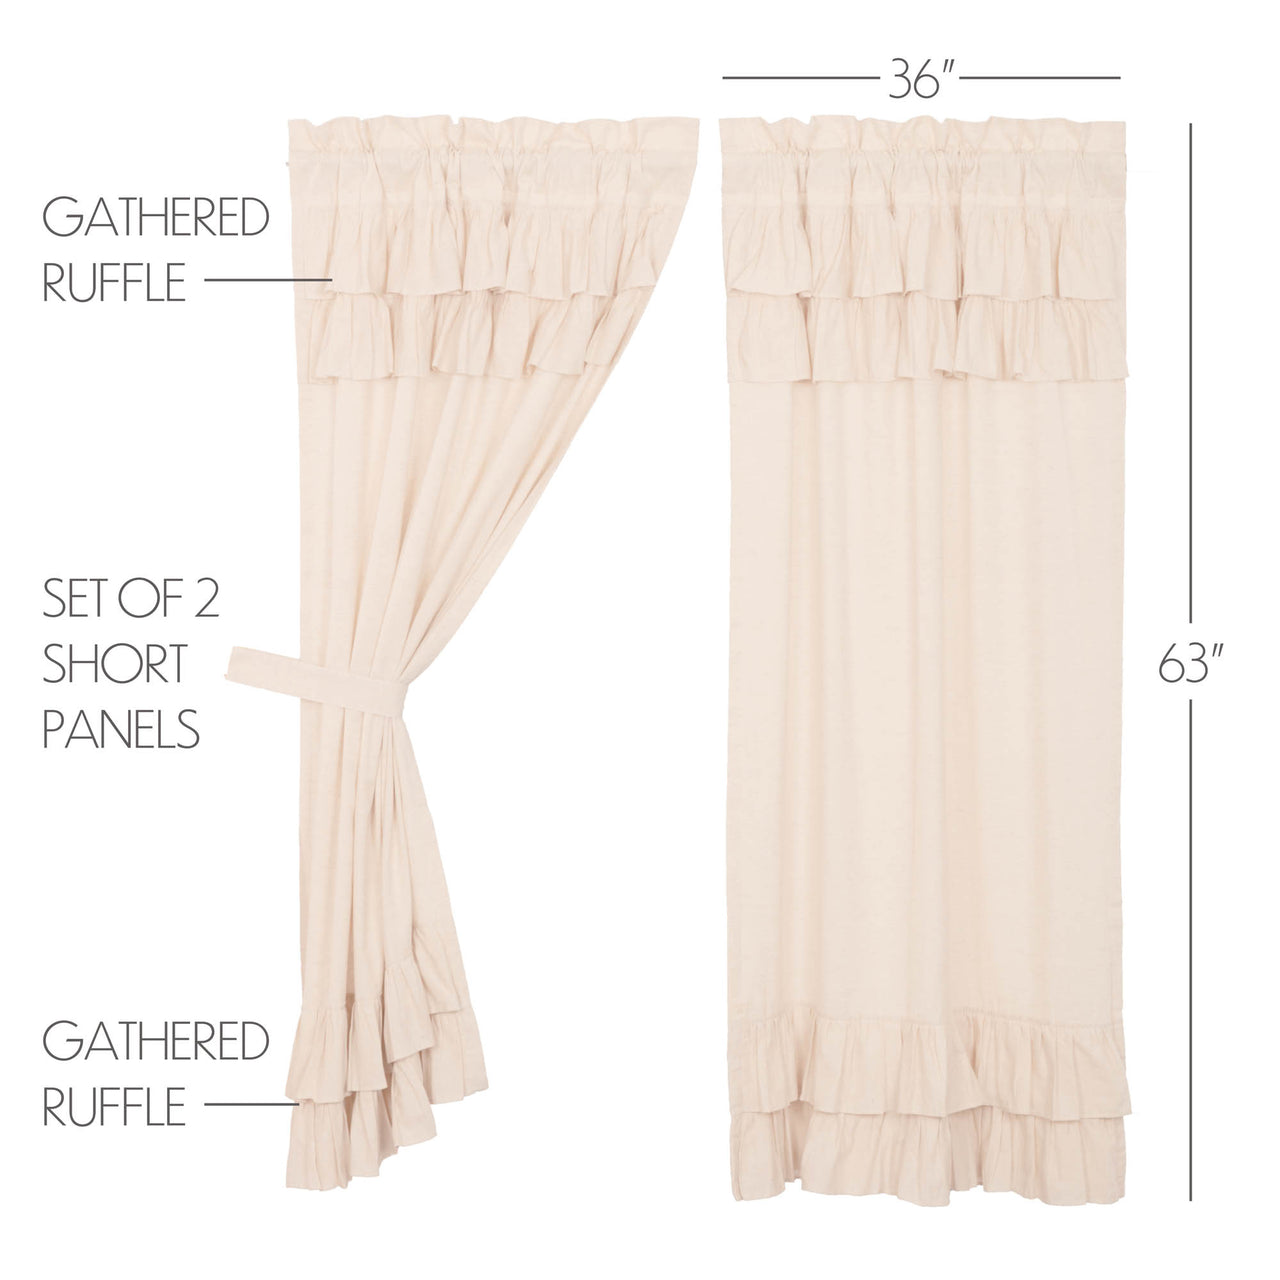 Simple Life Flax Natural Ruffled Short Panel Curtain Set of 2 63x36 VHC Brands